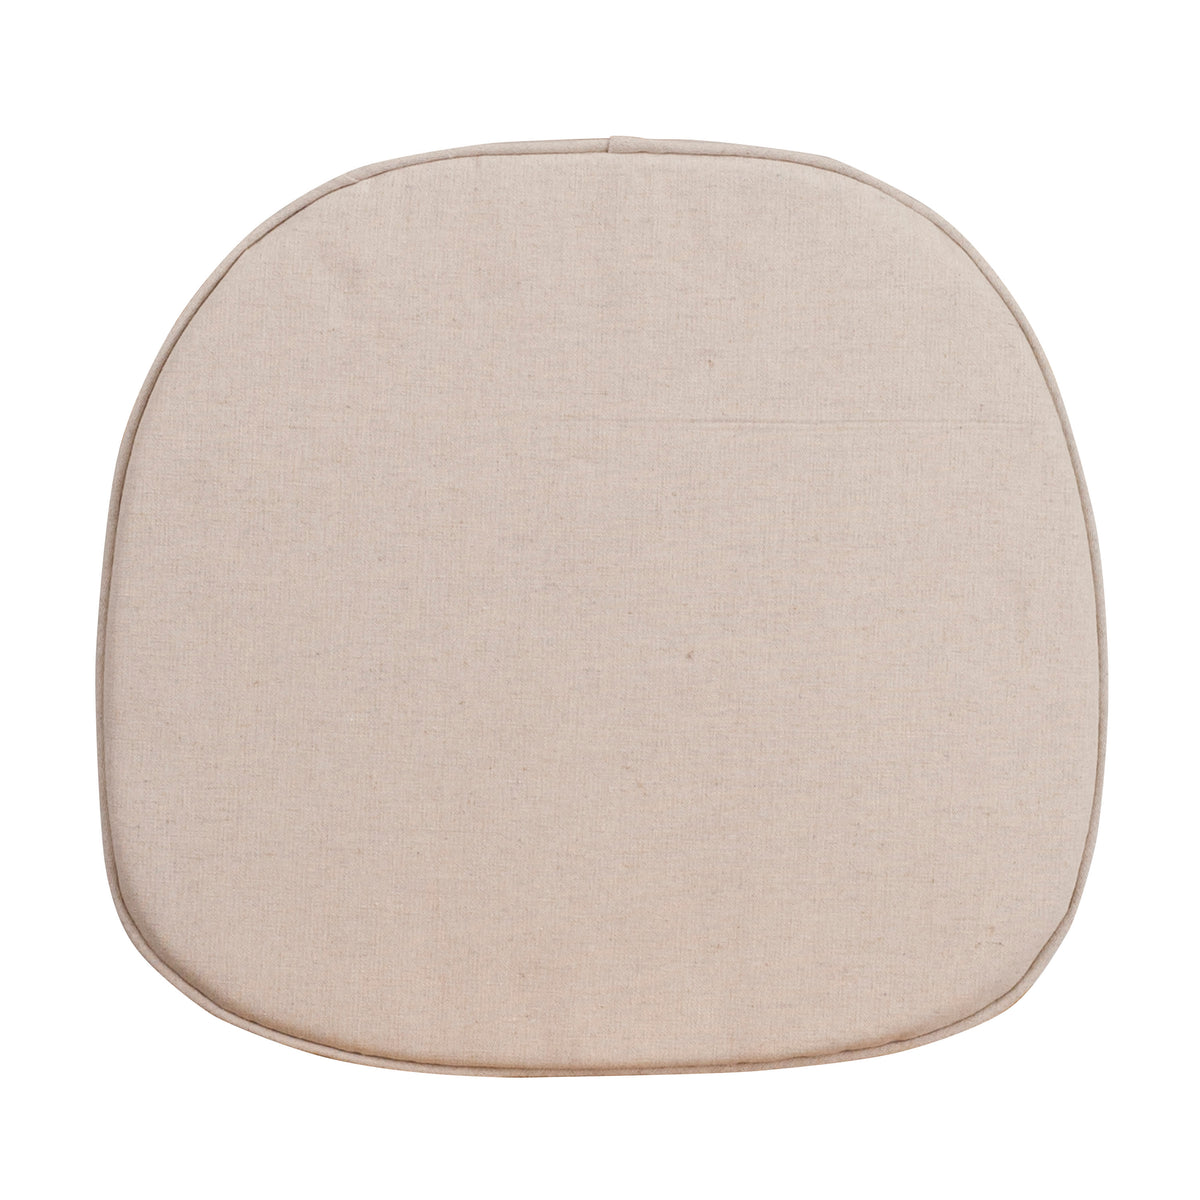 Kids Natural Thin Cushion with Removable Cover & Tieback Straps